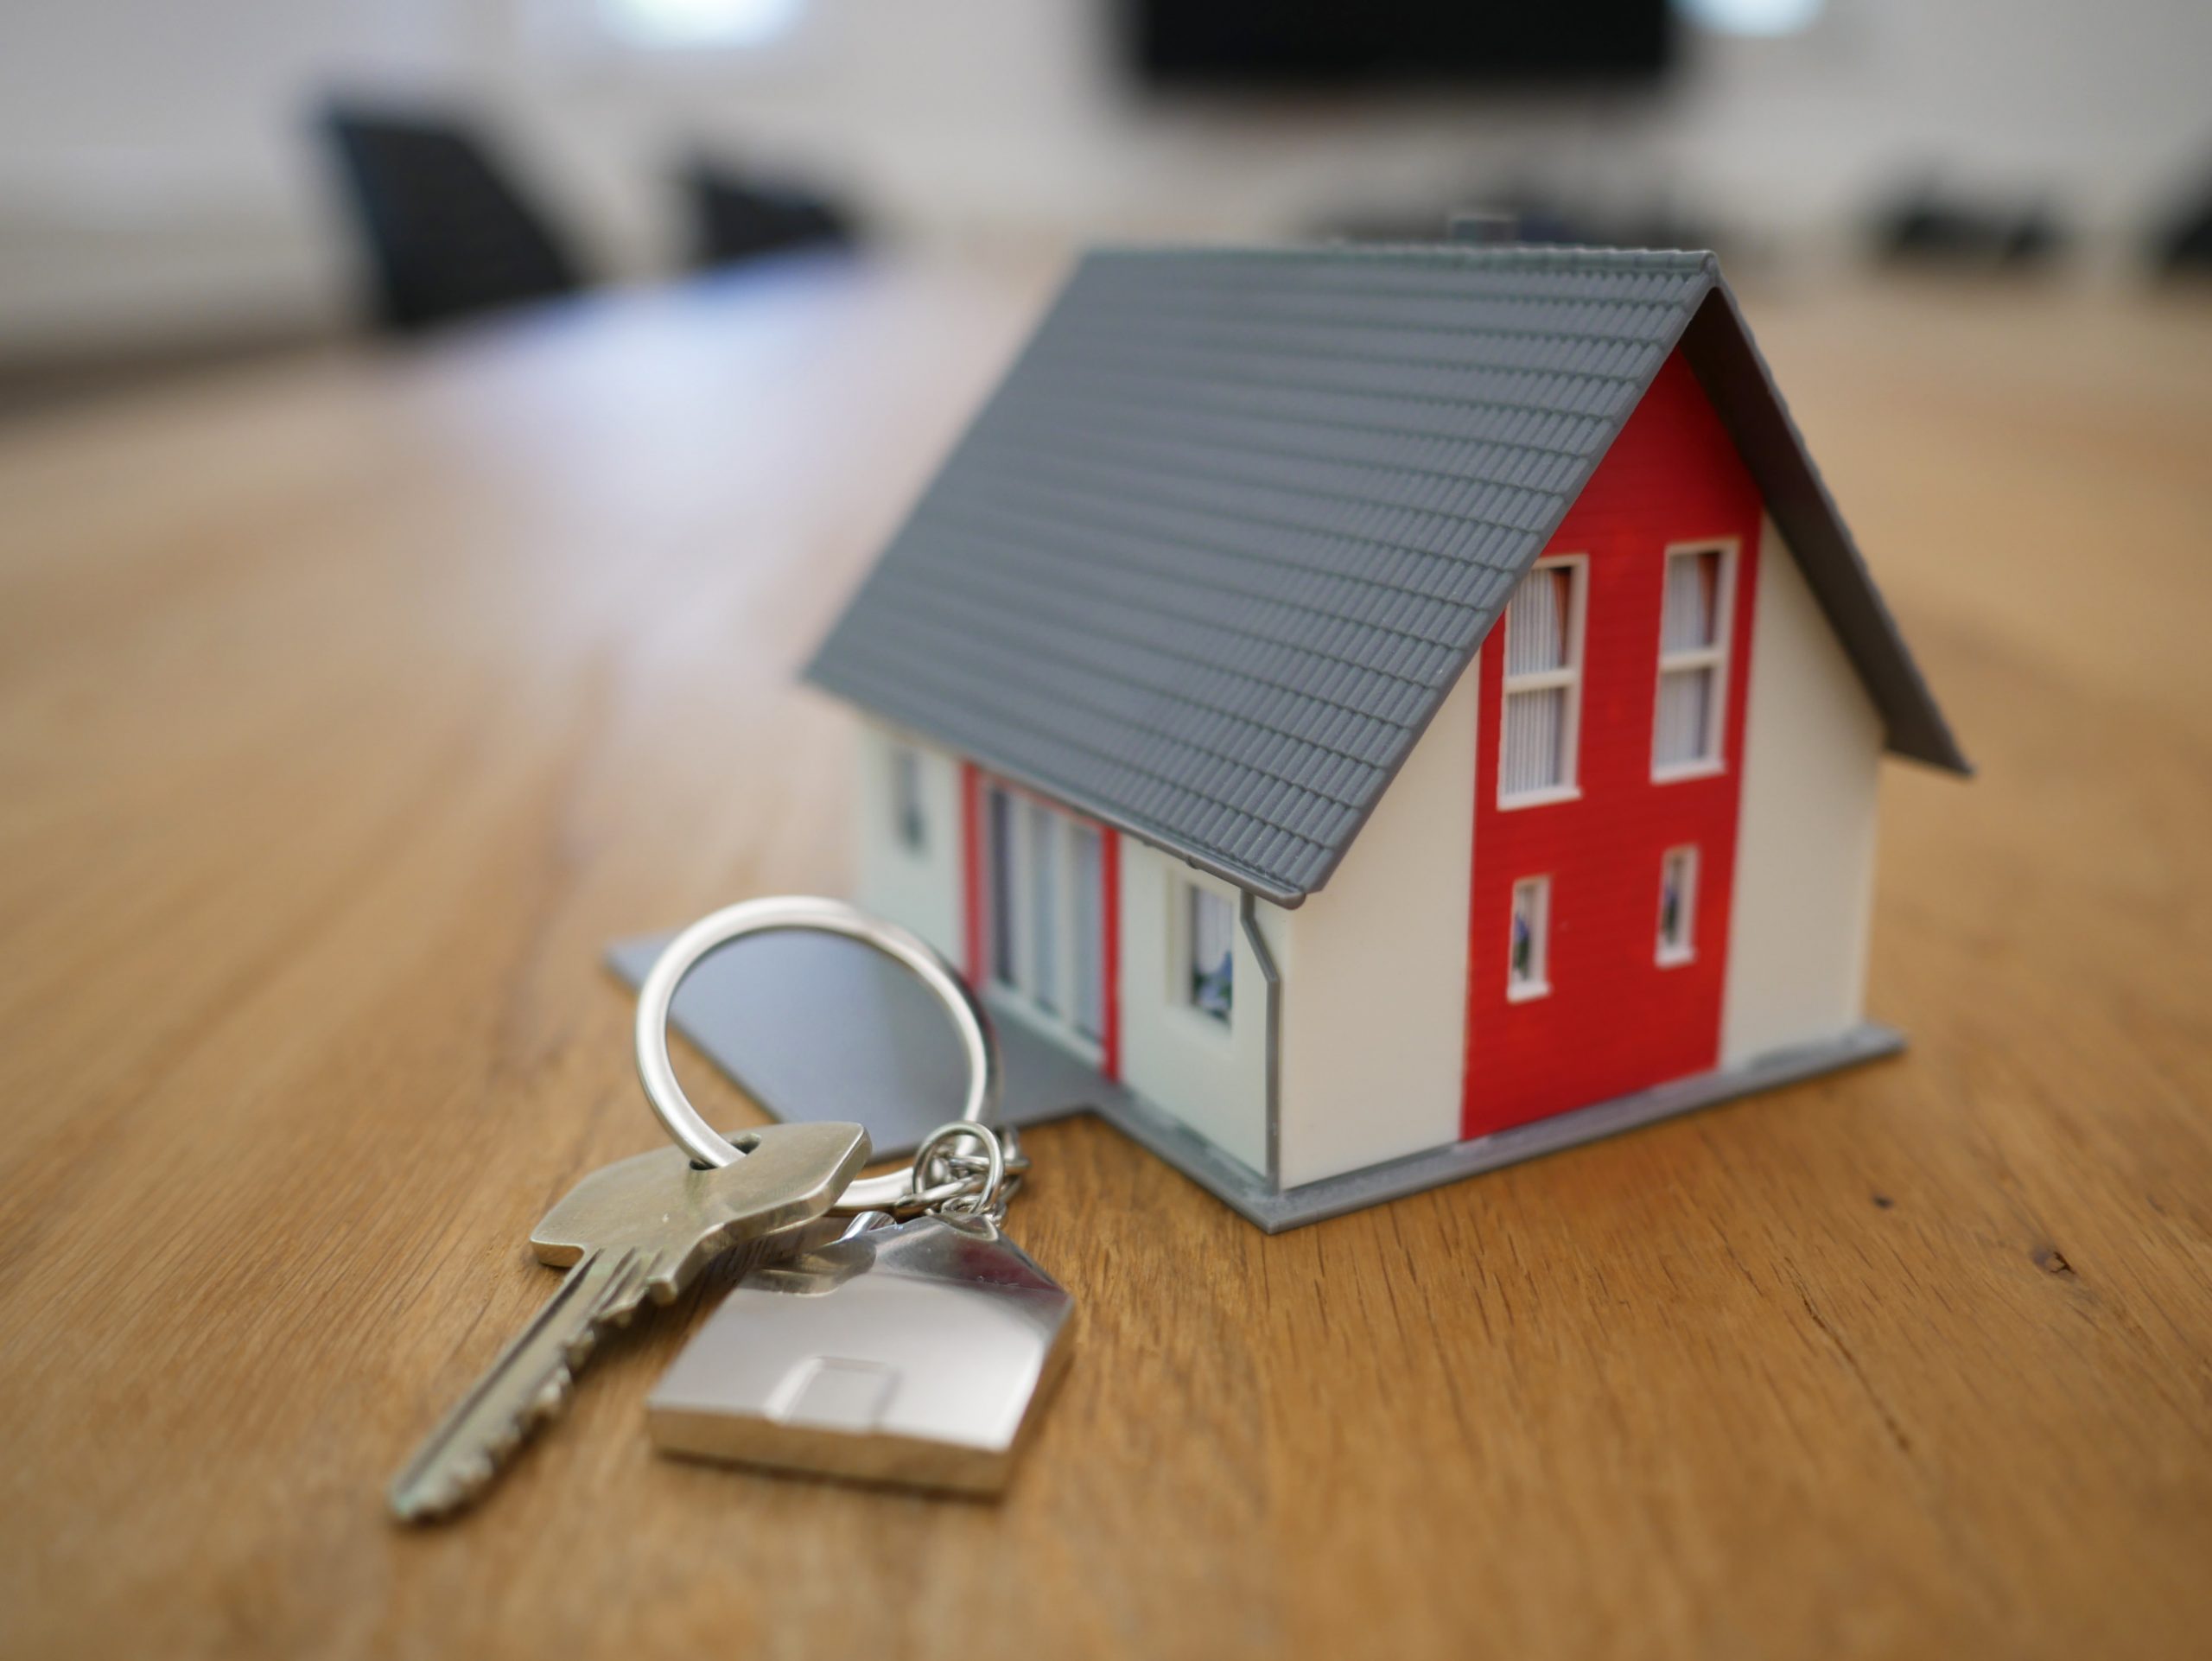 Property keys with house attachment